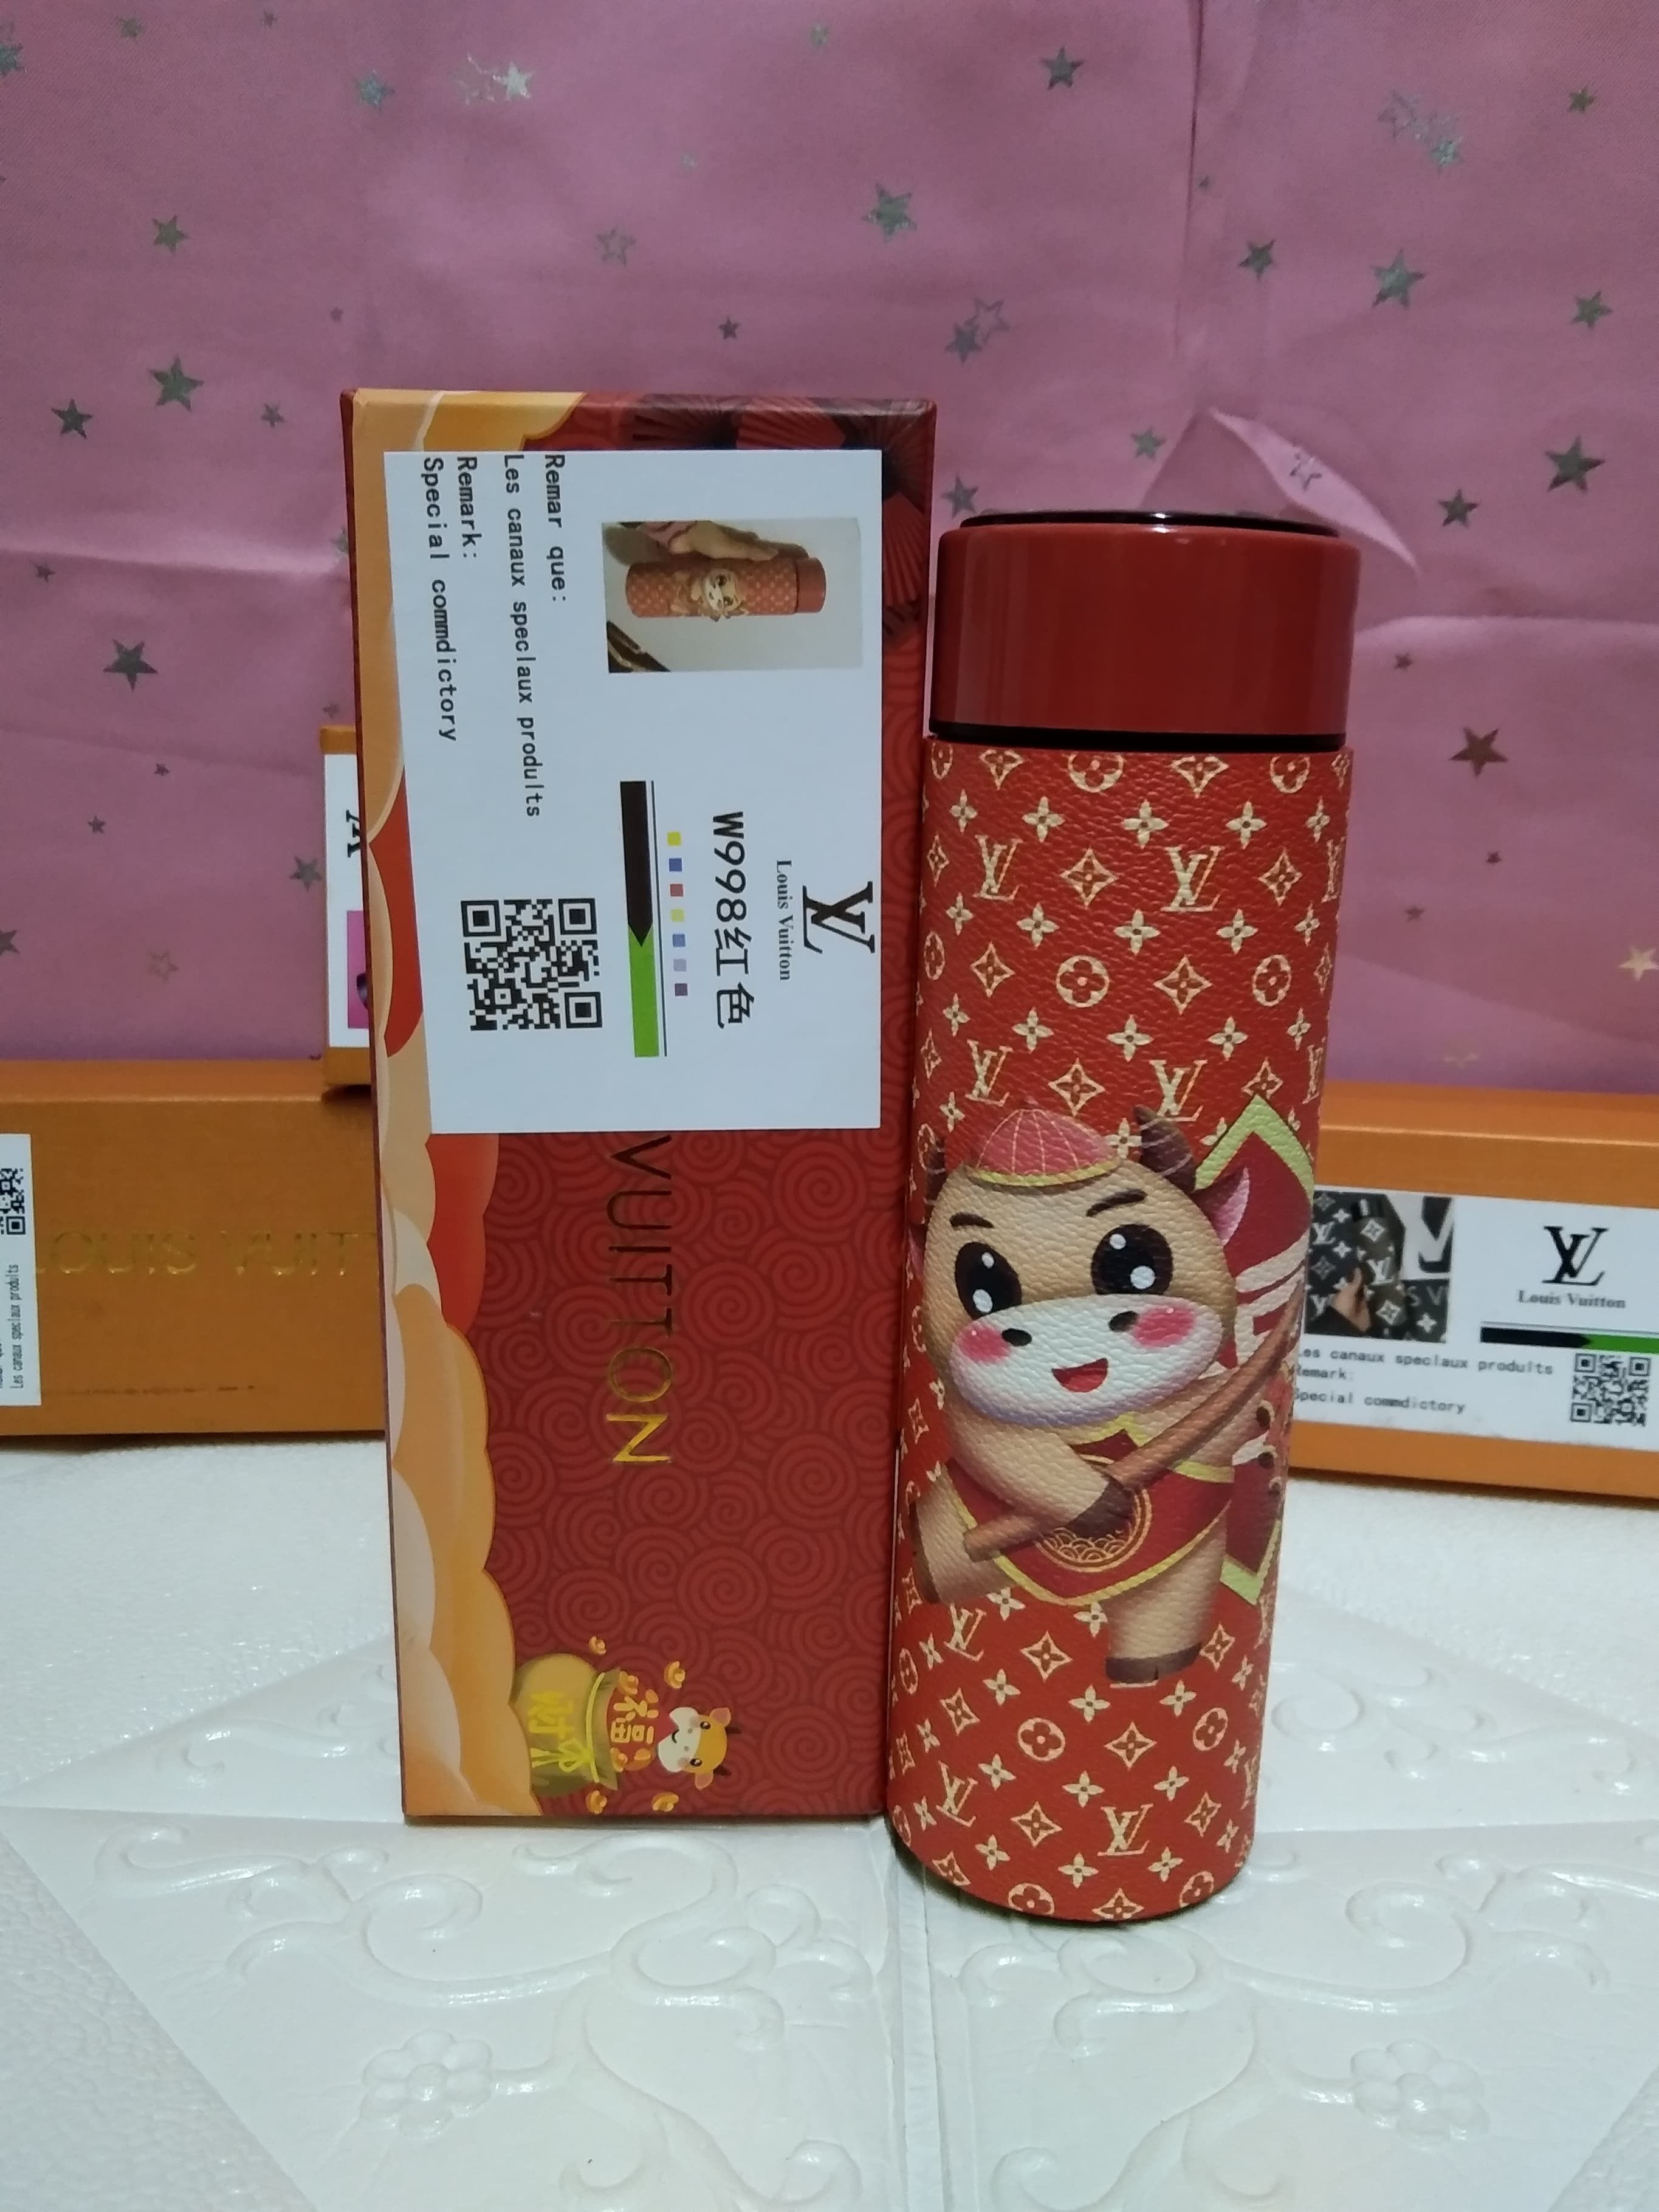 Lv and Others Stainless Steel Vacuum Flask Tumbler with LED